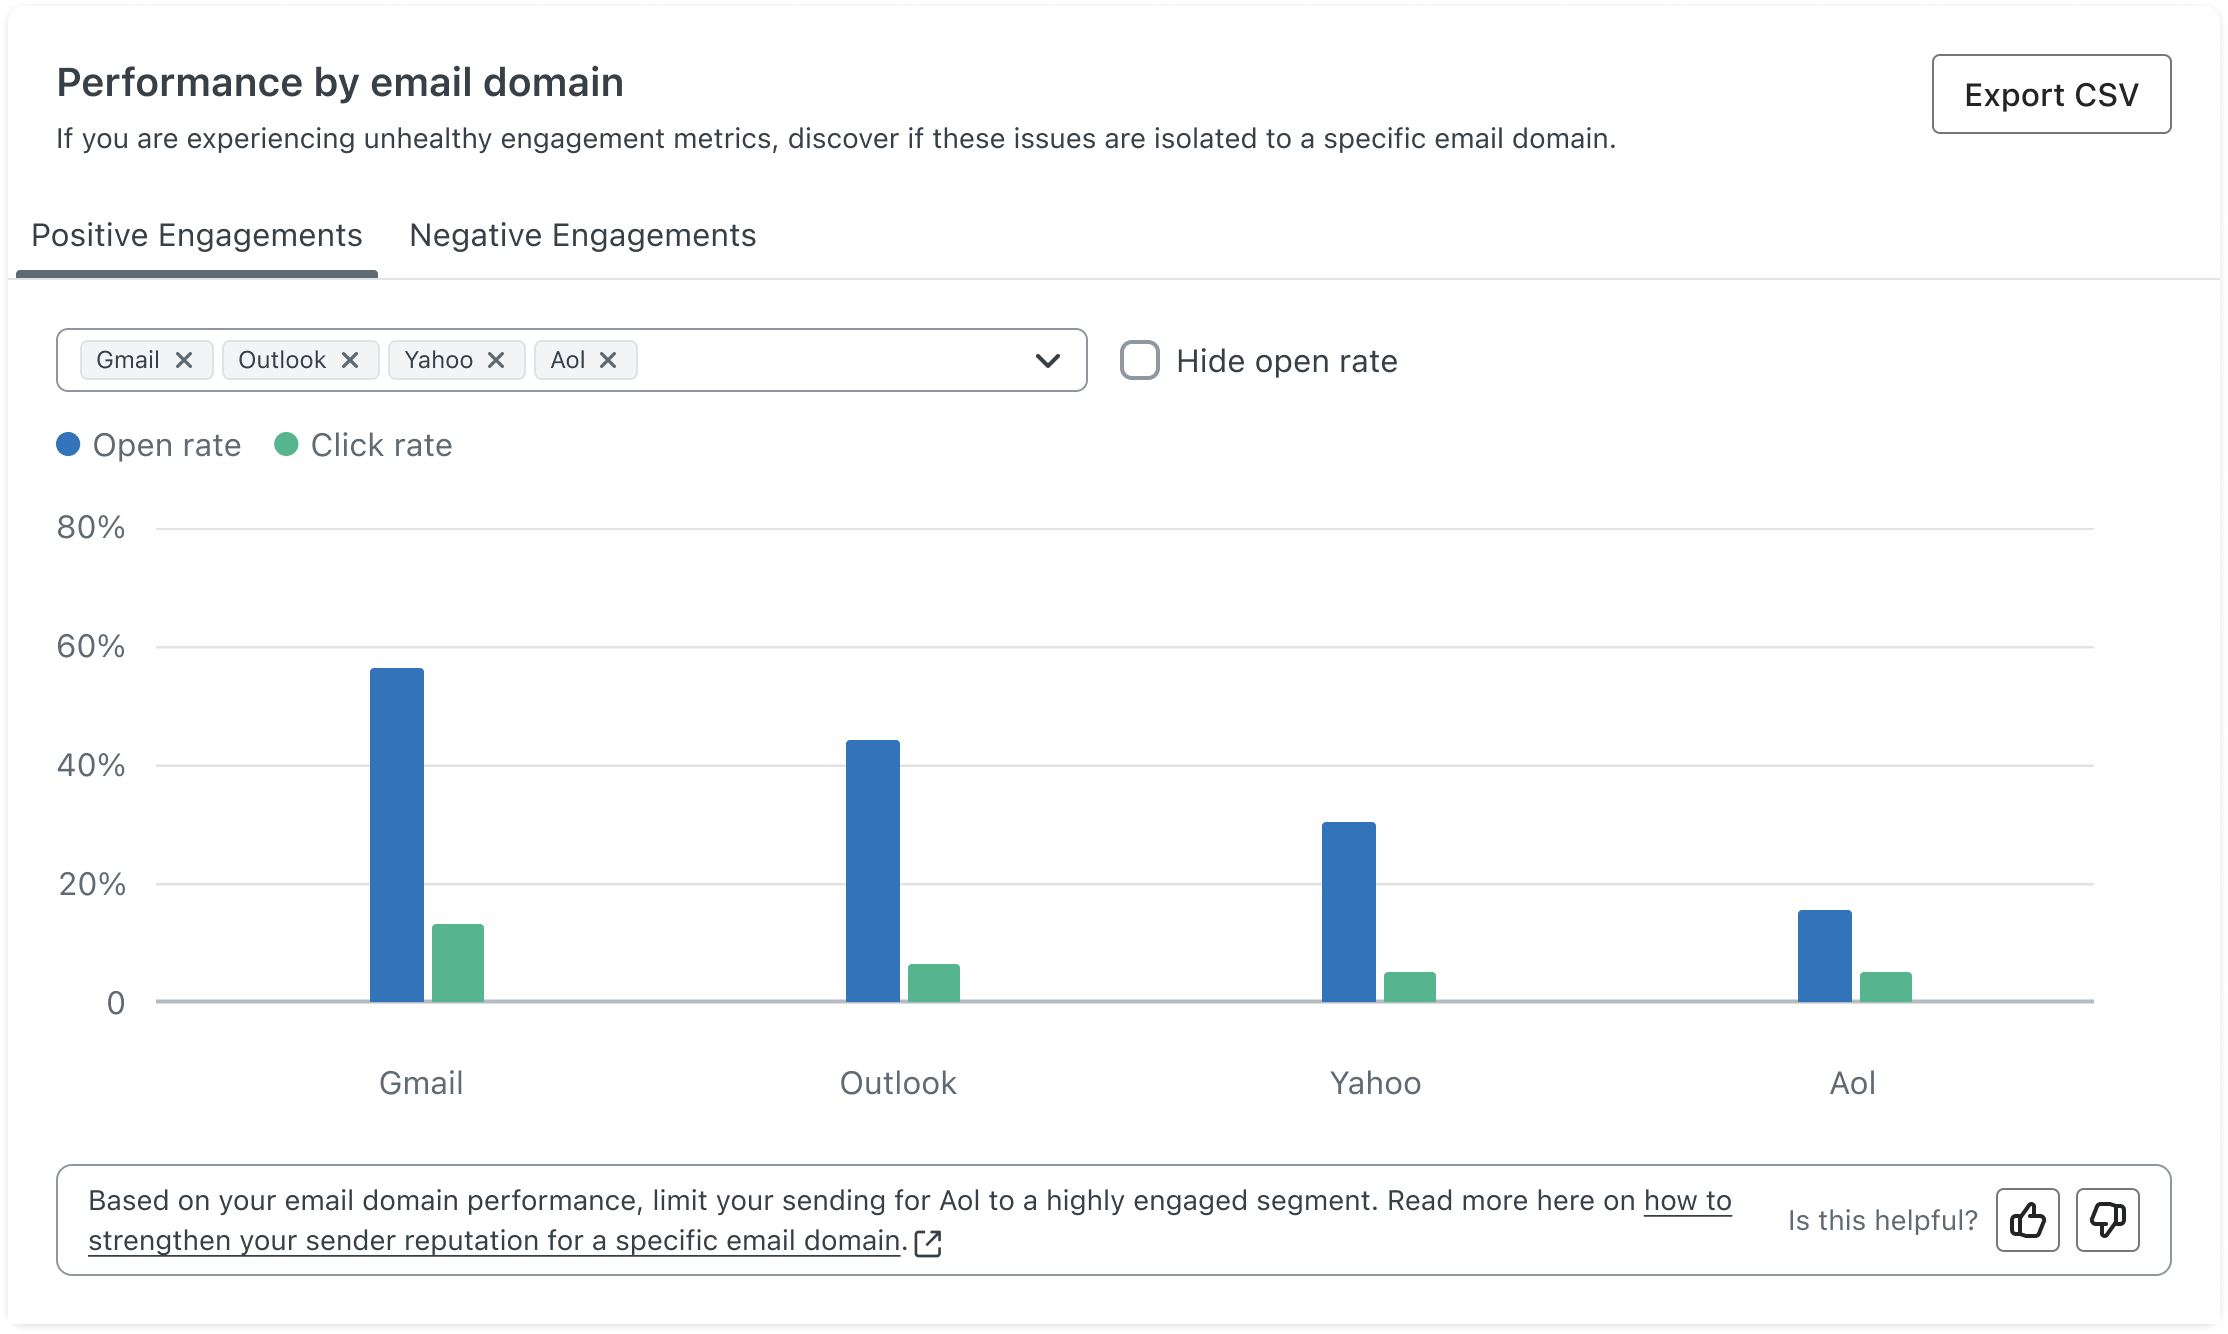 Easily see a chart of open and click rates by email domain.